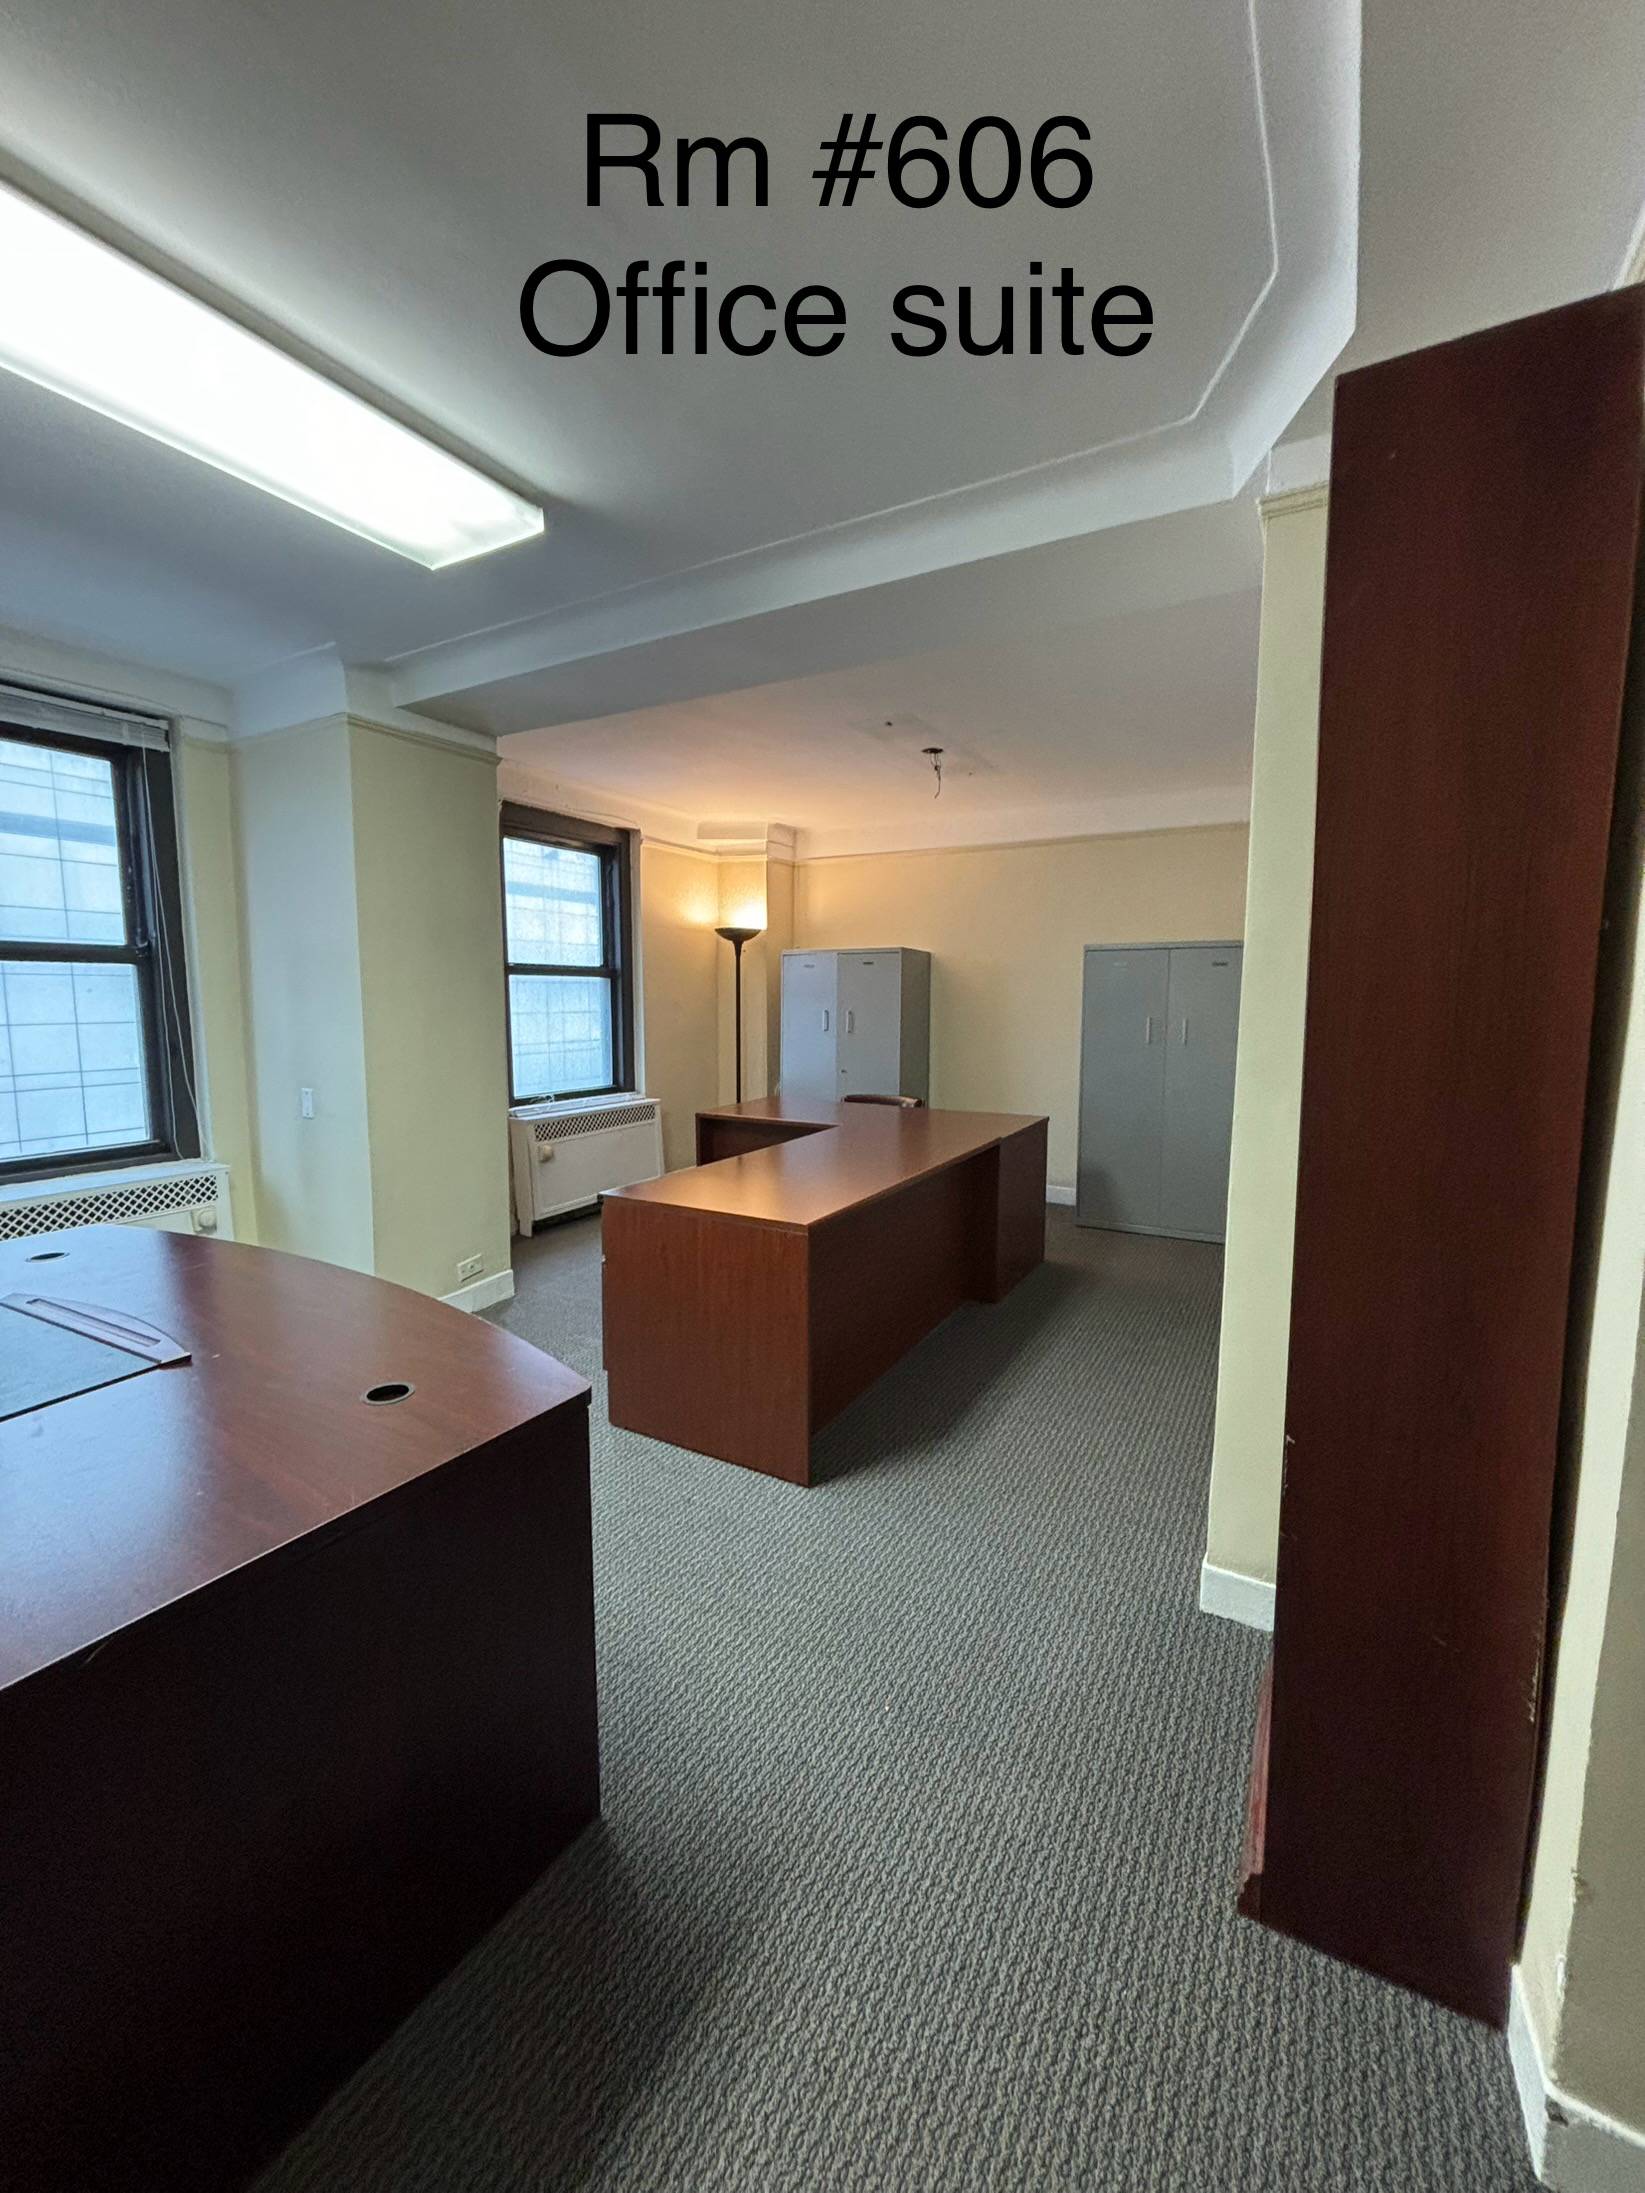 Elevate Your Business Profile with a Prestigious Address at 16 Penn Plaza; a Prime Manhattan Location